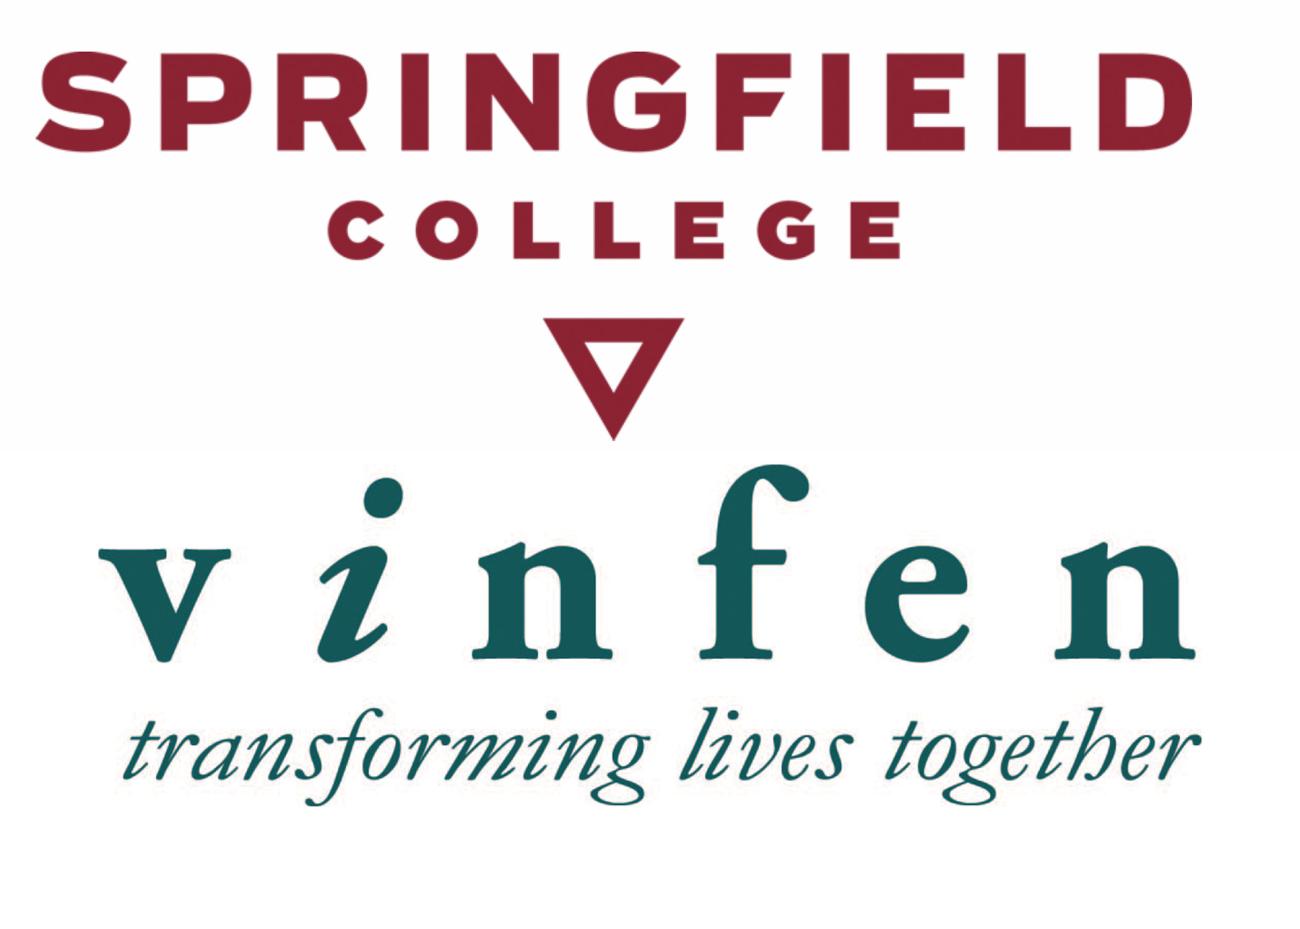 Springfield College has partnered with Vinfen, a leading provider of services for individuals with disabilities and life challenges, to assist with providing education and training opportunities for Vinfen professionals locally, regionally, and nationally.